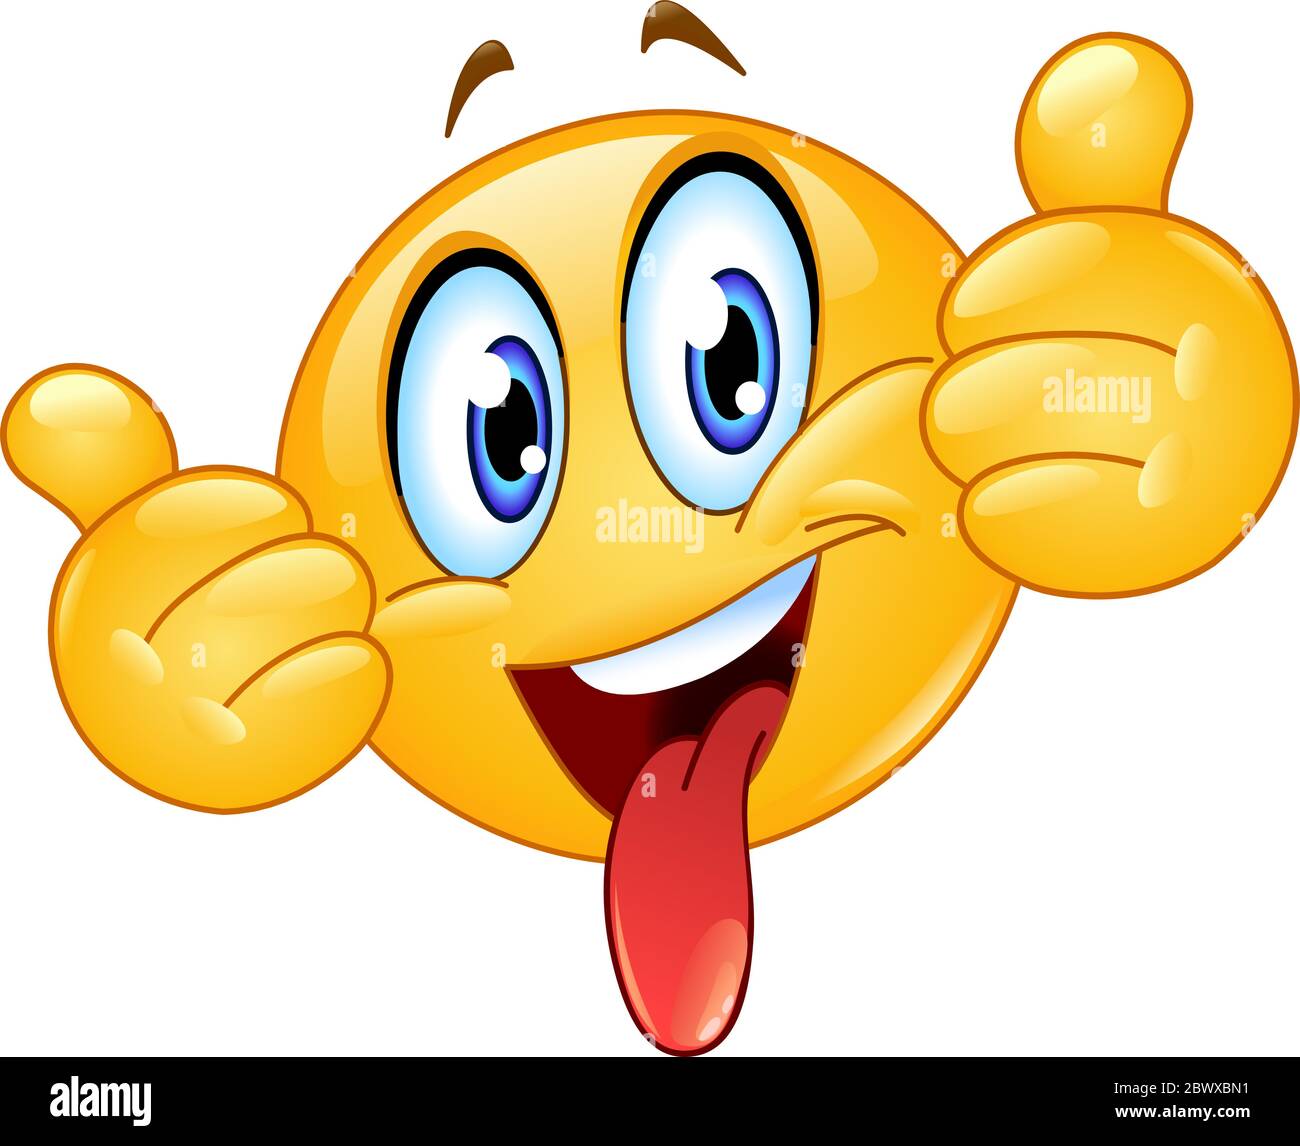 Emoticon showing thumbs out and sticking out a tongue Stock Vector